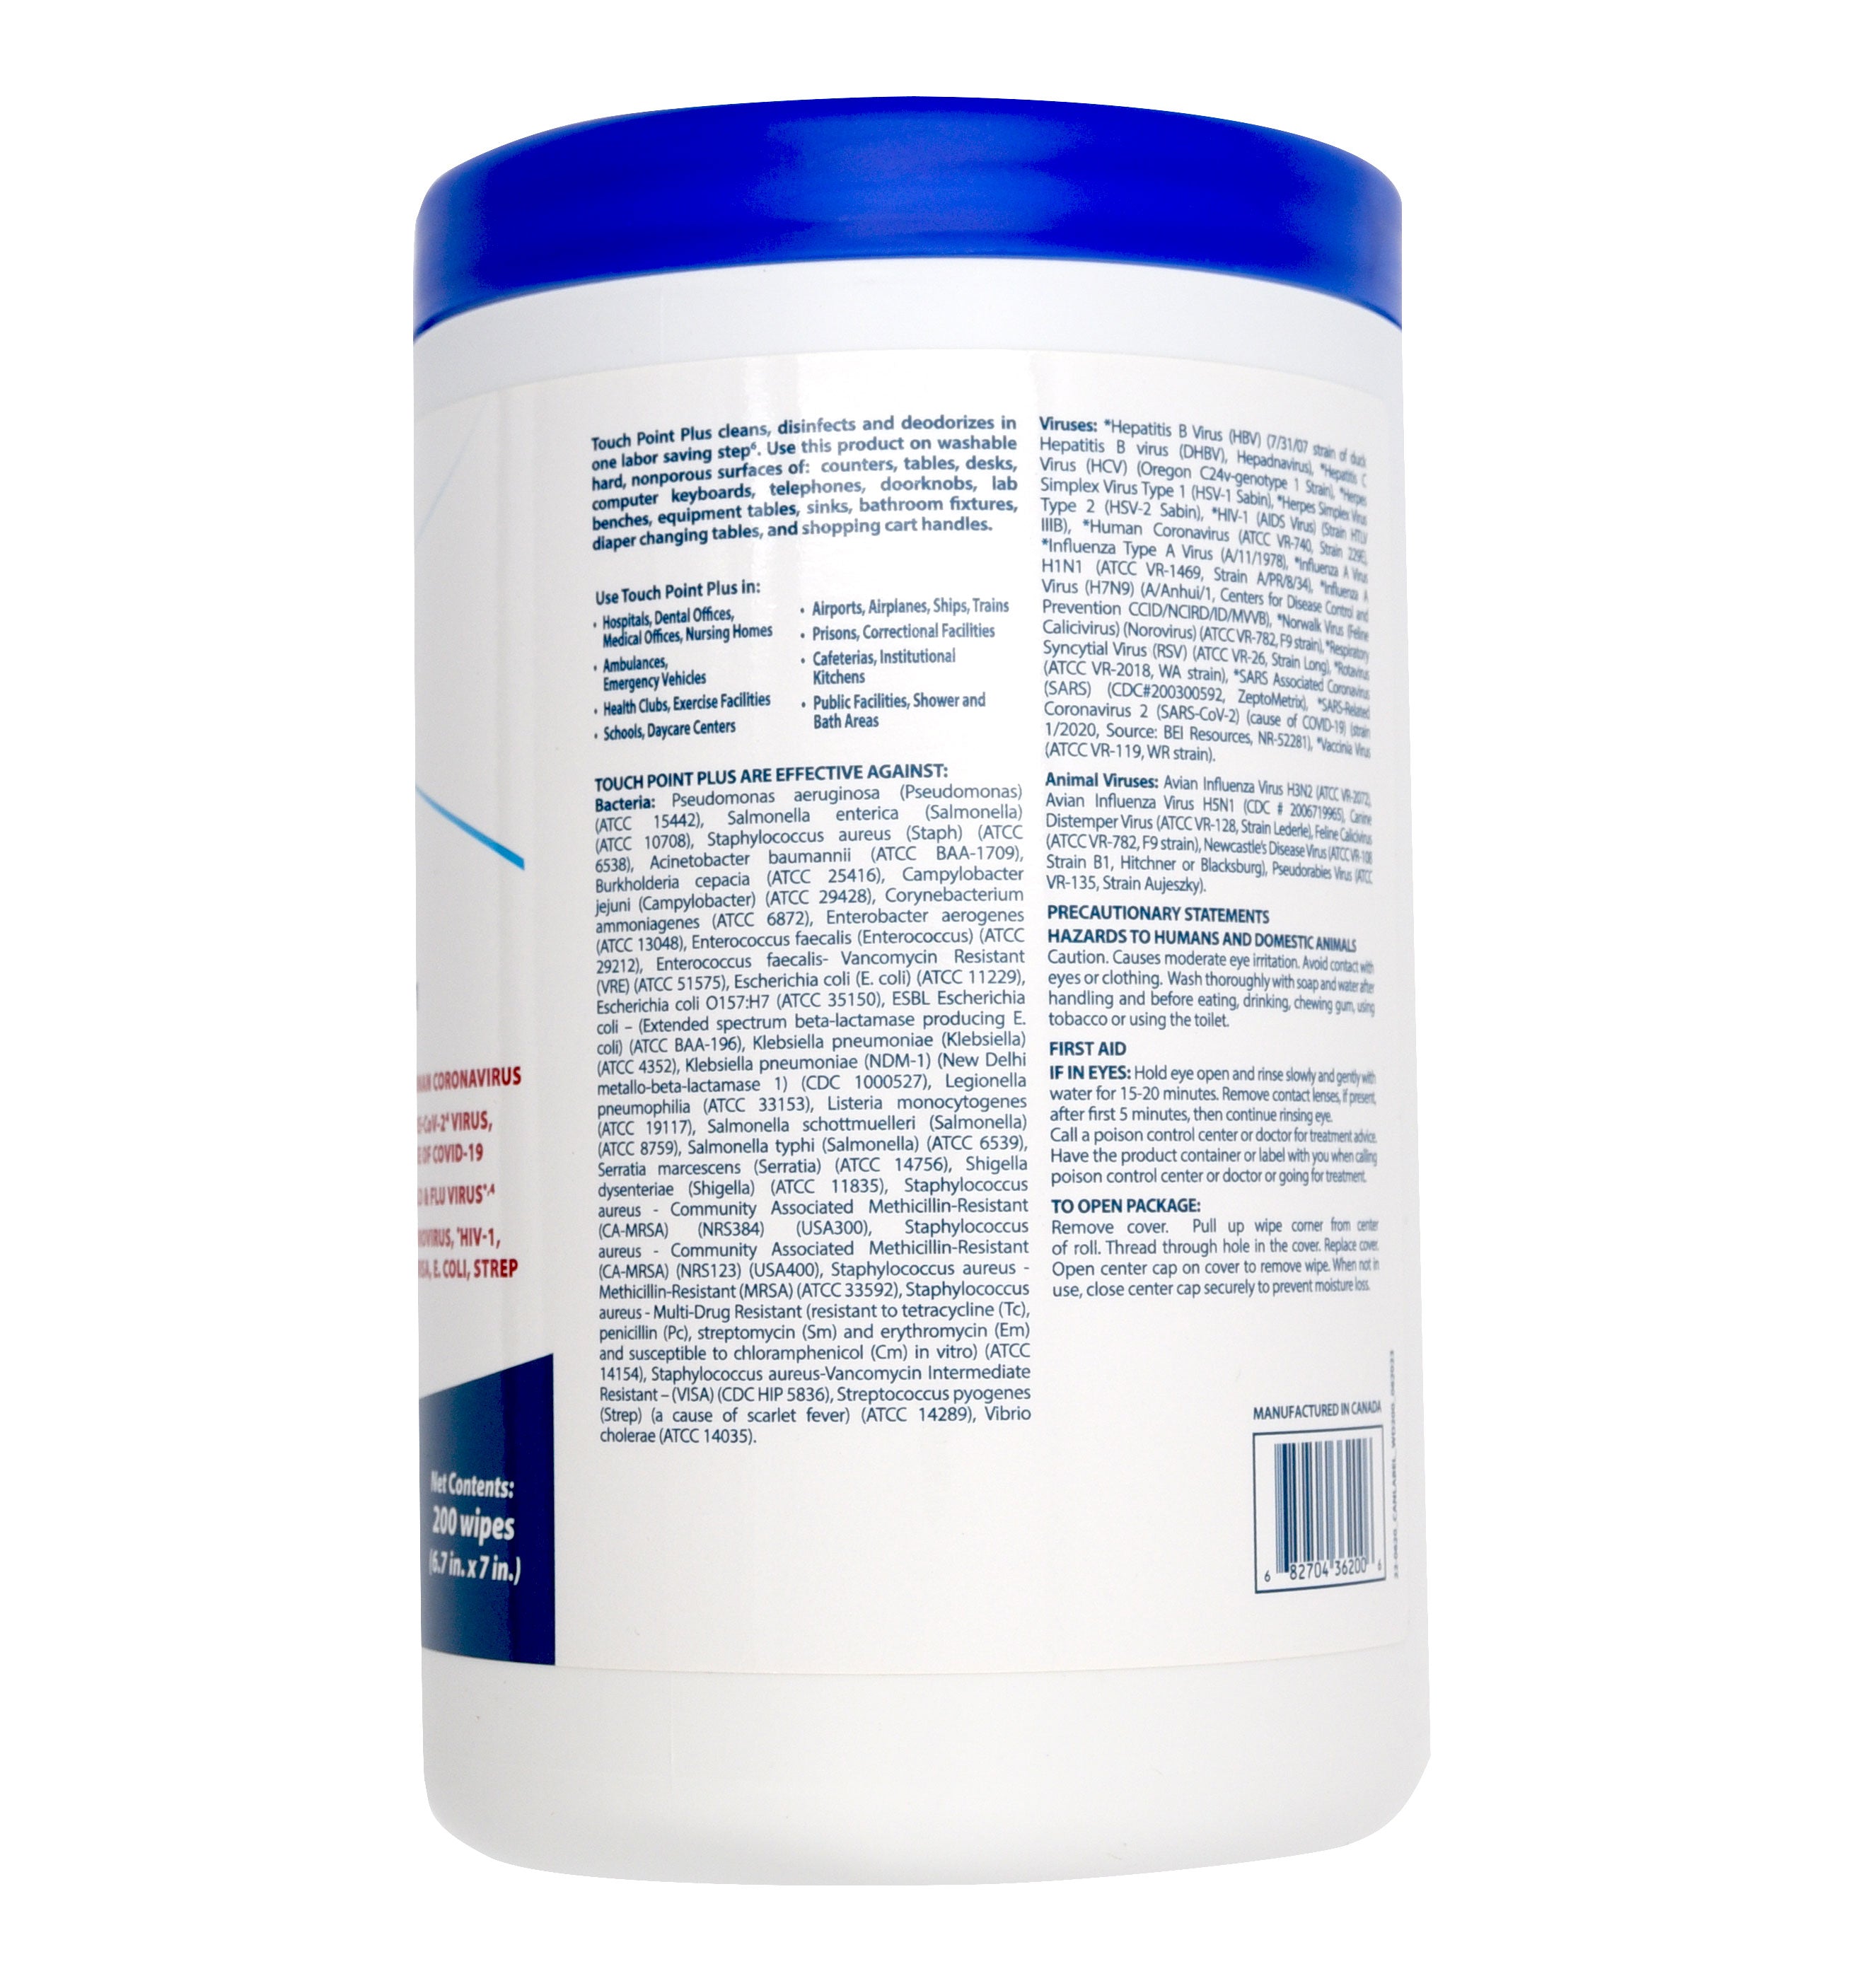 TouchPoint Plus Disinfectant Wipes Product Details Continued